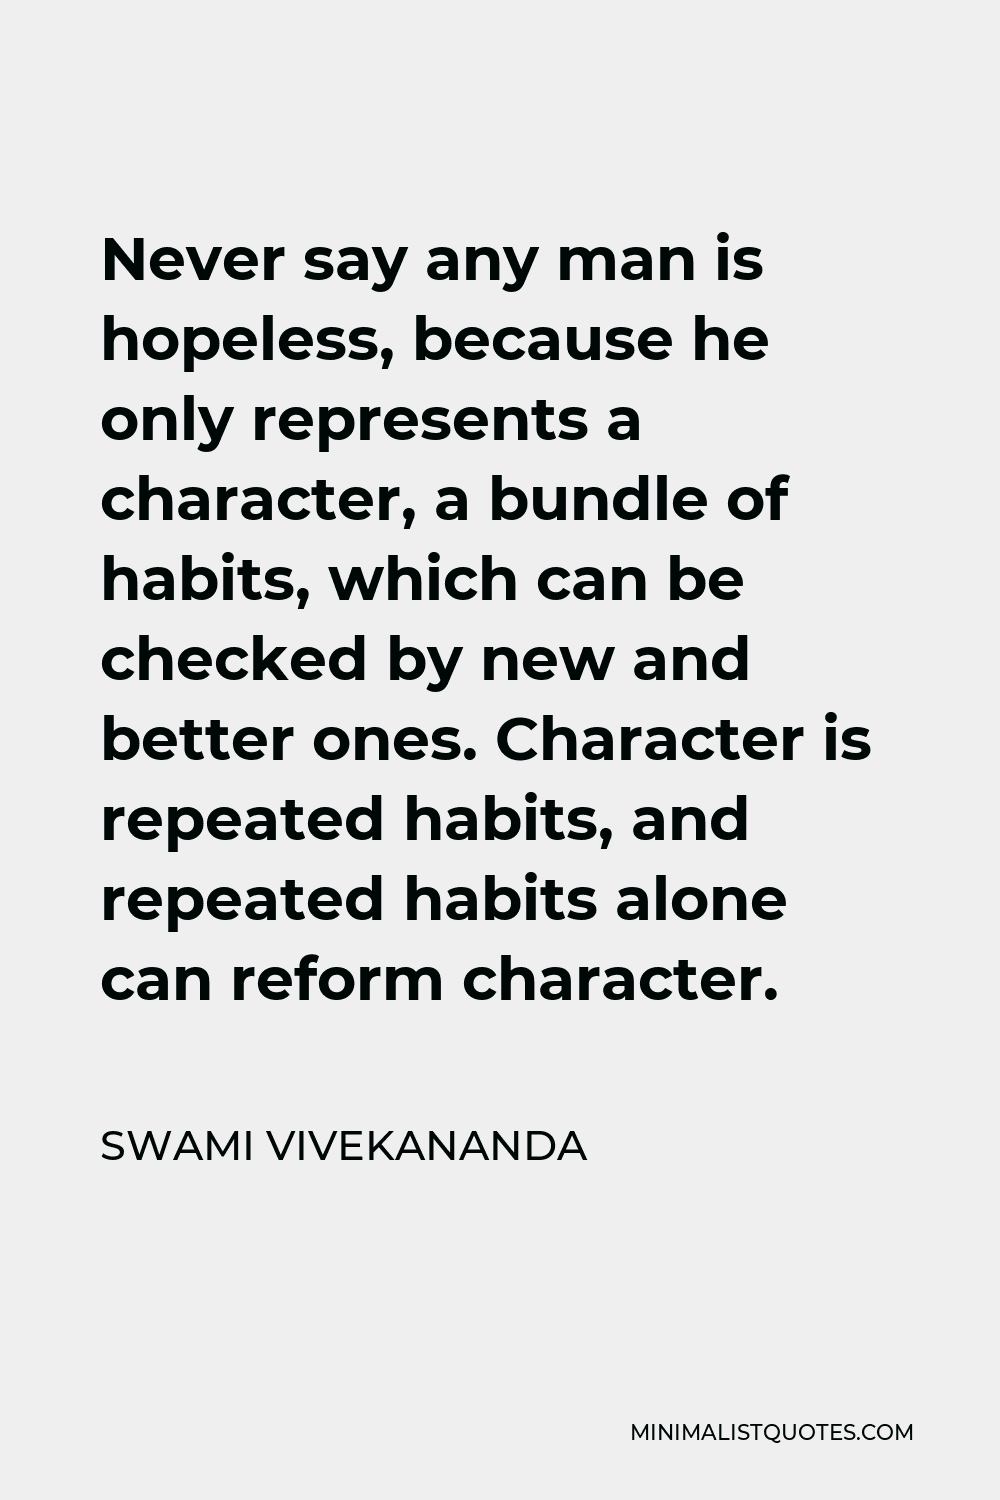 Swami Vivekananda Quote - Never say any man is hopeless, because he only represents a character, a bundle of habits, which can be checked by new and better ones. Character is repeated habits, and repeated habits alone can reform character.